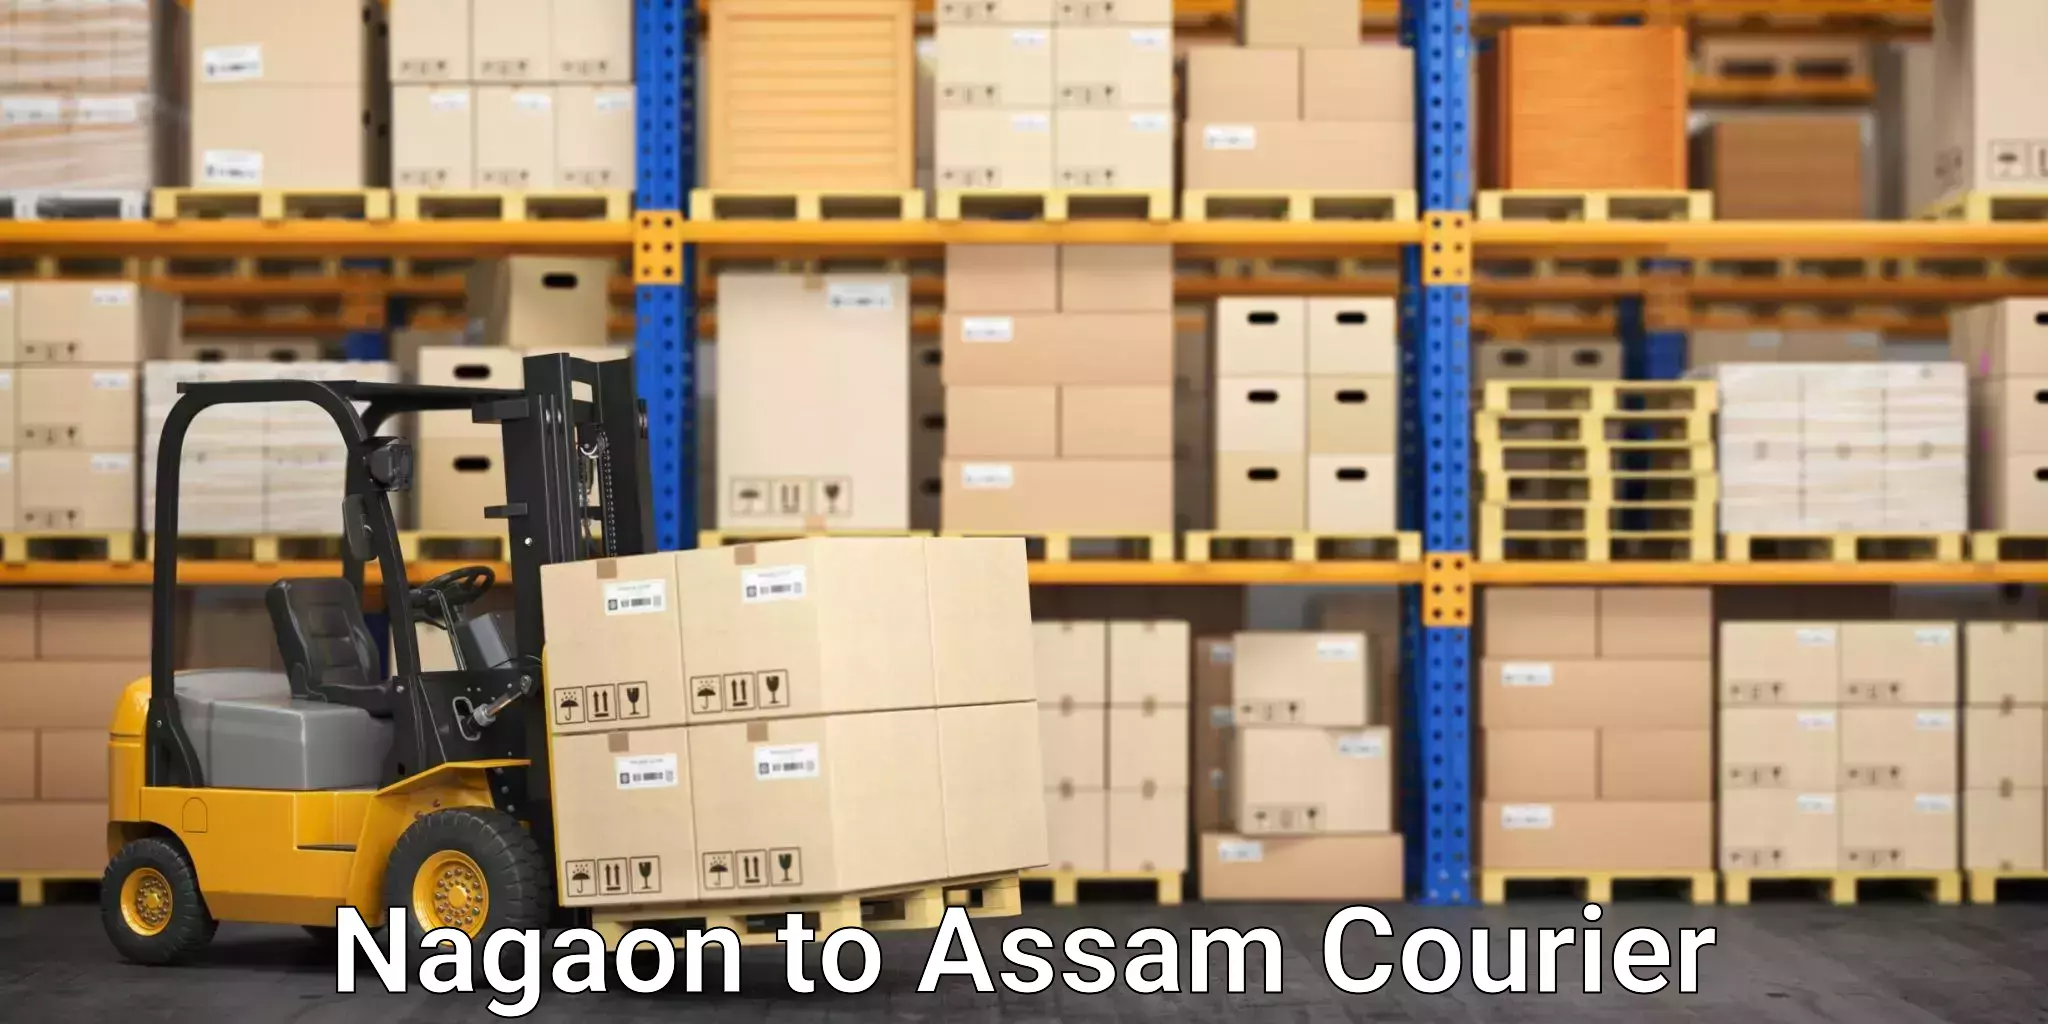 Multi-service courier options Nagaon to Dhemaji